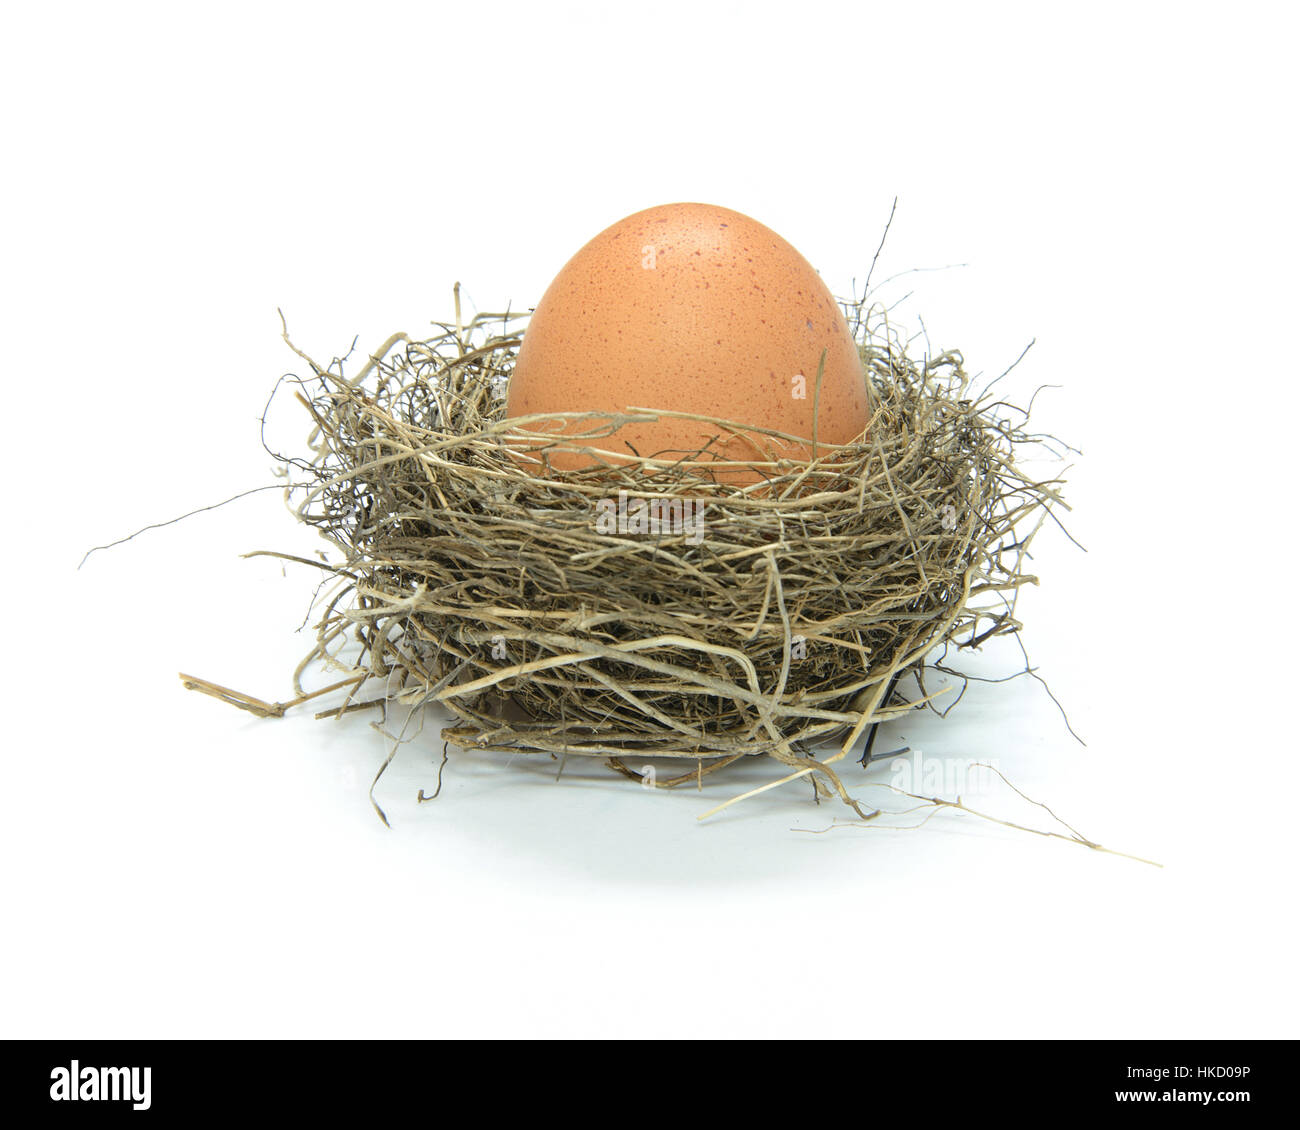 A bird nest filled with a large hen's egg viewed from above on a white background Stock Photo